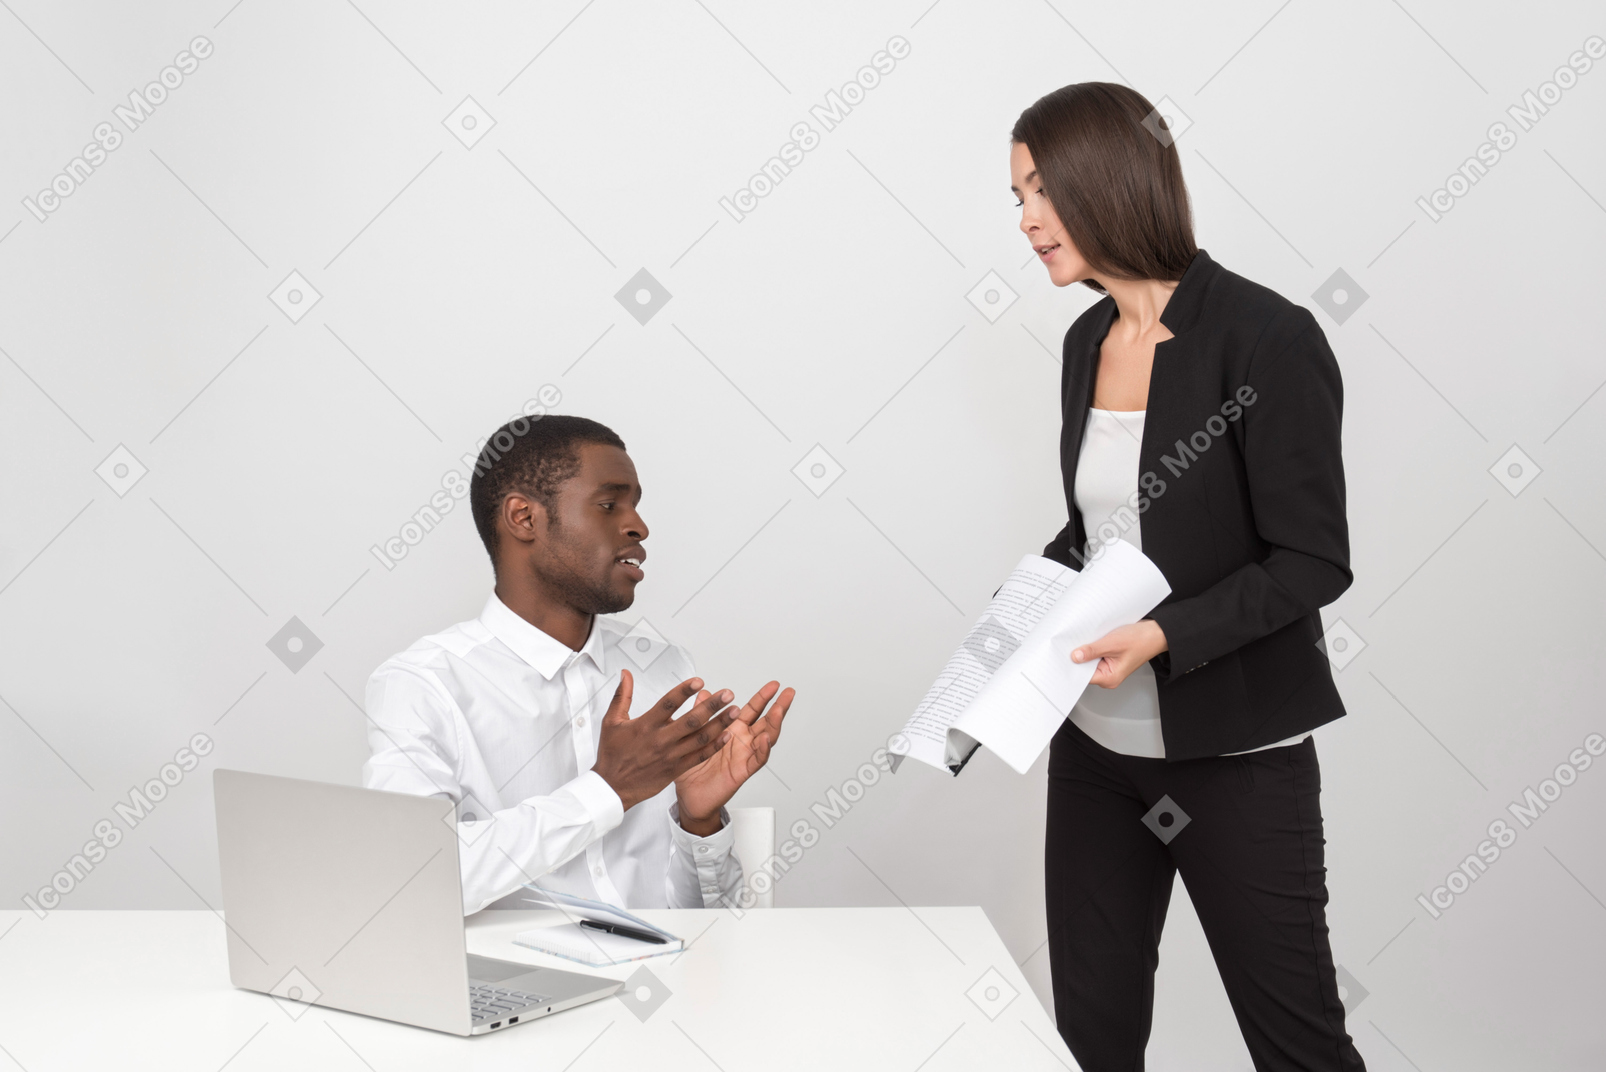 Angry female boss and her upset employee